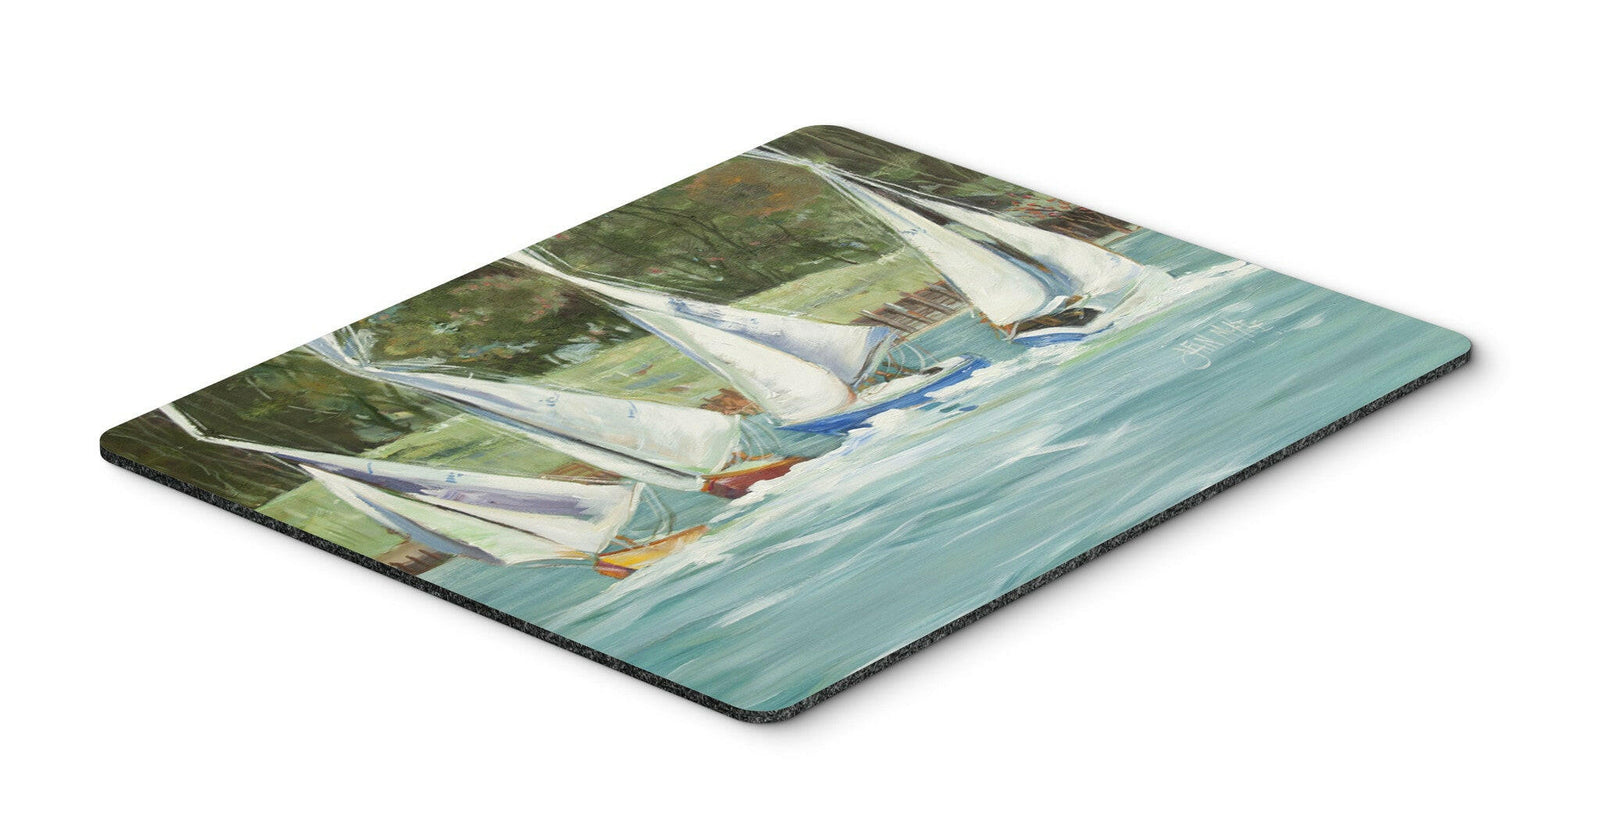 Sailboats on the bay Mouse Pad, Hot Pad or Trivet JMK1035MP by Caroline's Treasures